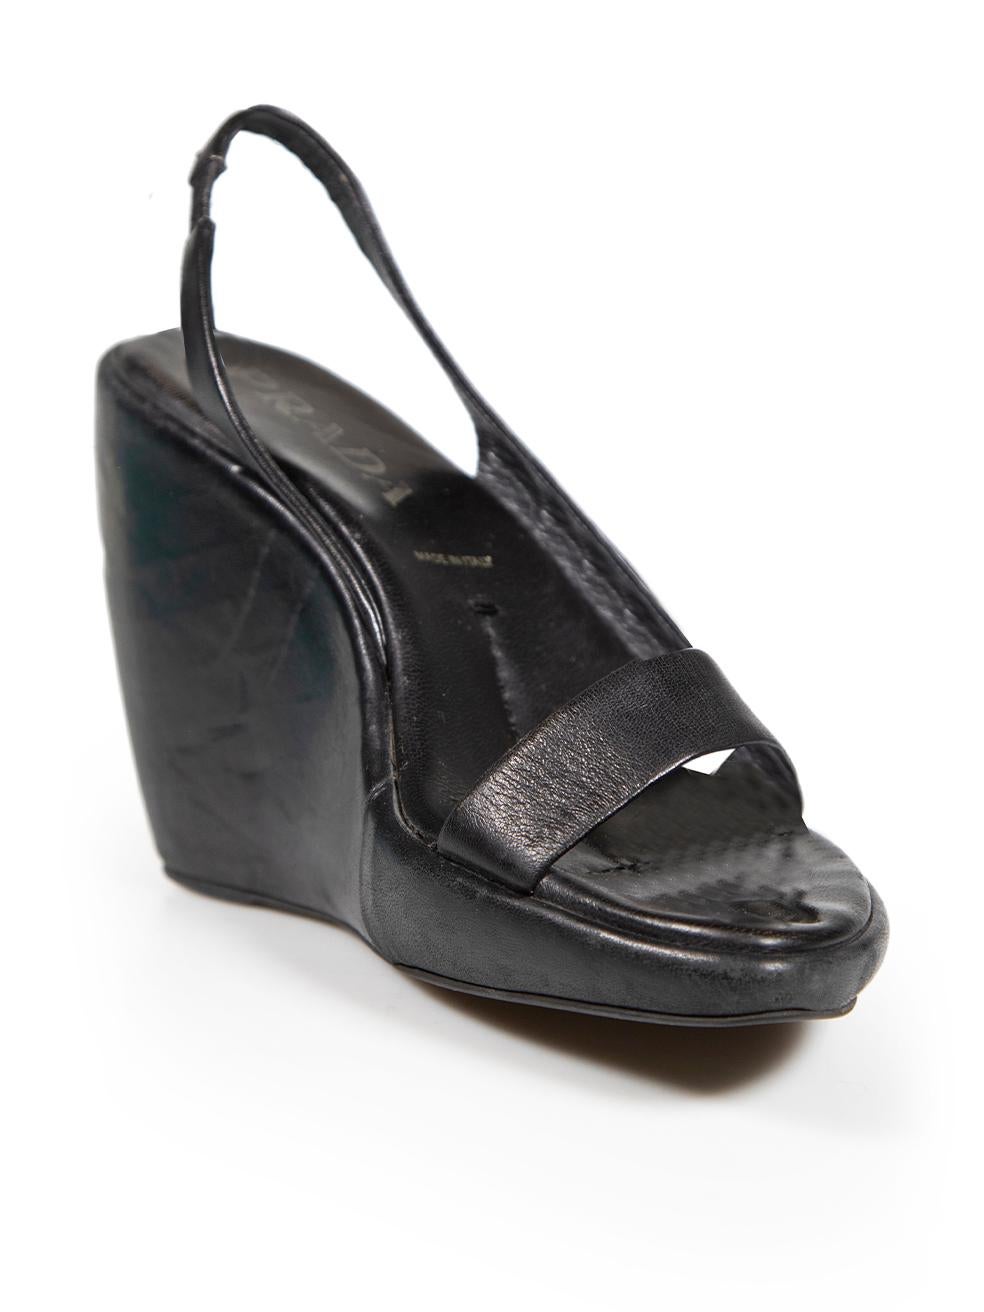 CONDITION is Good. Minor wear to wedge heels is evident. Light abrasions to the leather and some scratches to the side of the wedge heels on this used Prada designer resale item.
 
 
 
 Details
 
 
 Black
 
 Leather
 
 Wedge sandals
 
 Slingback
 
